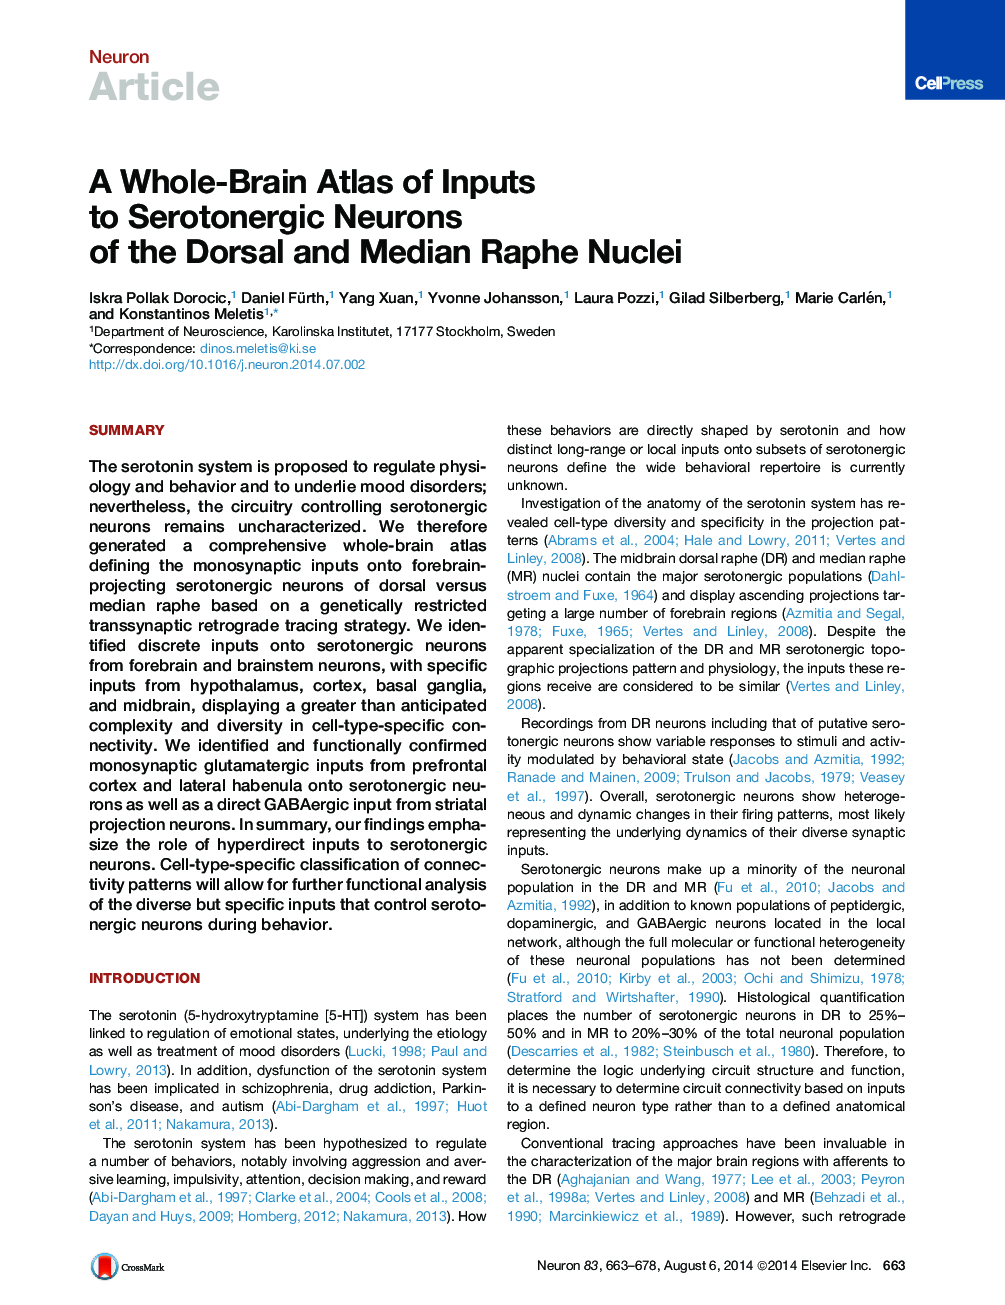 A Whole-Brain Atlas of Inputs to Serotonergic Neurons of the Dorsal and Median Raphe Nuclei